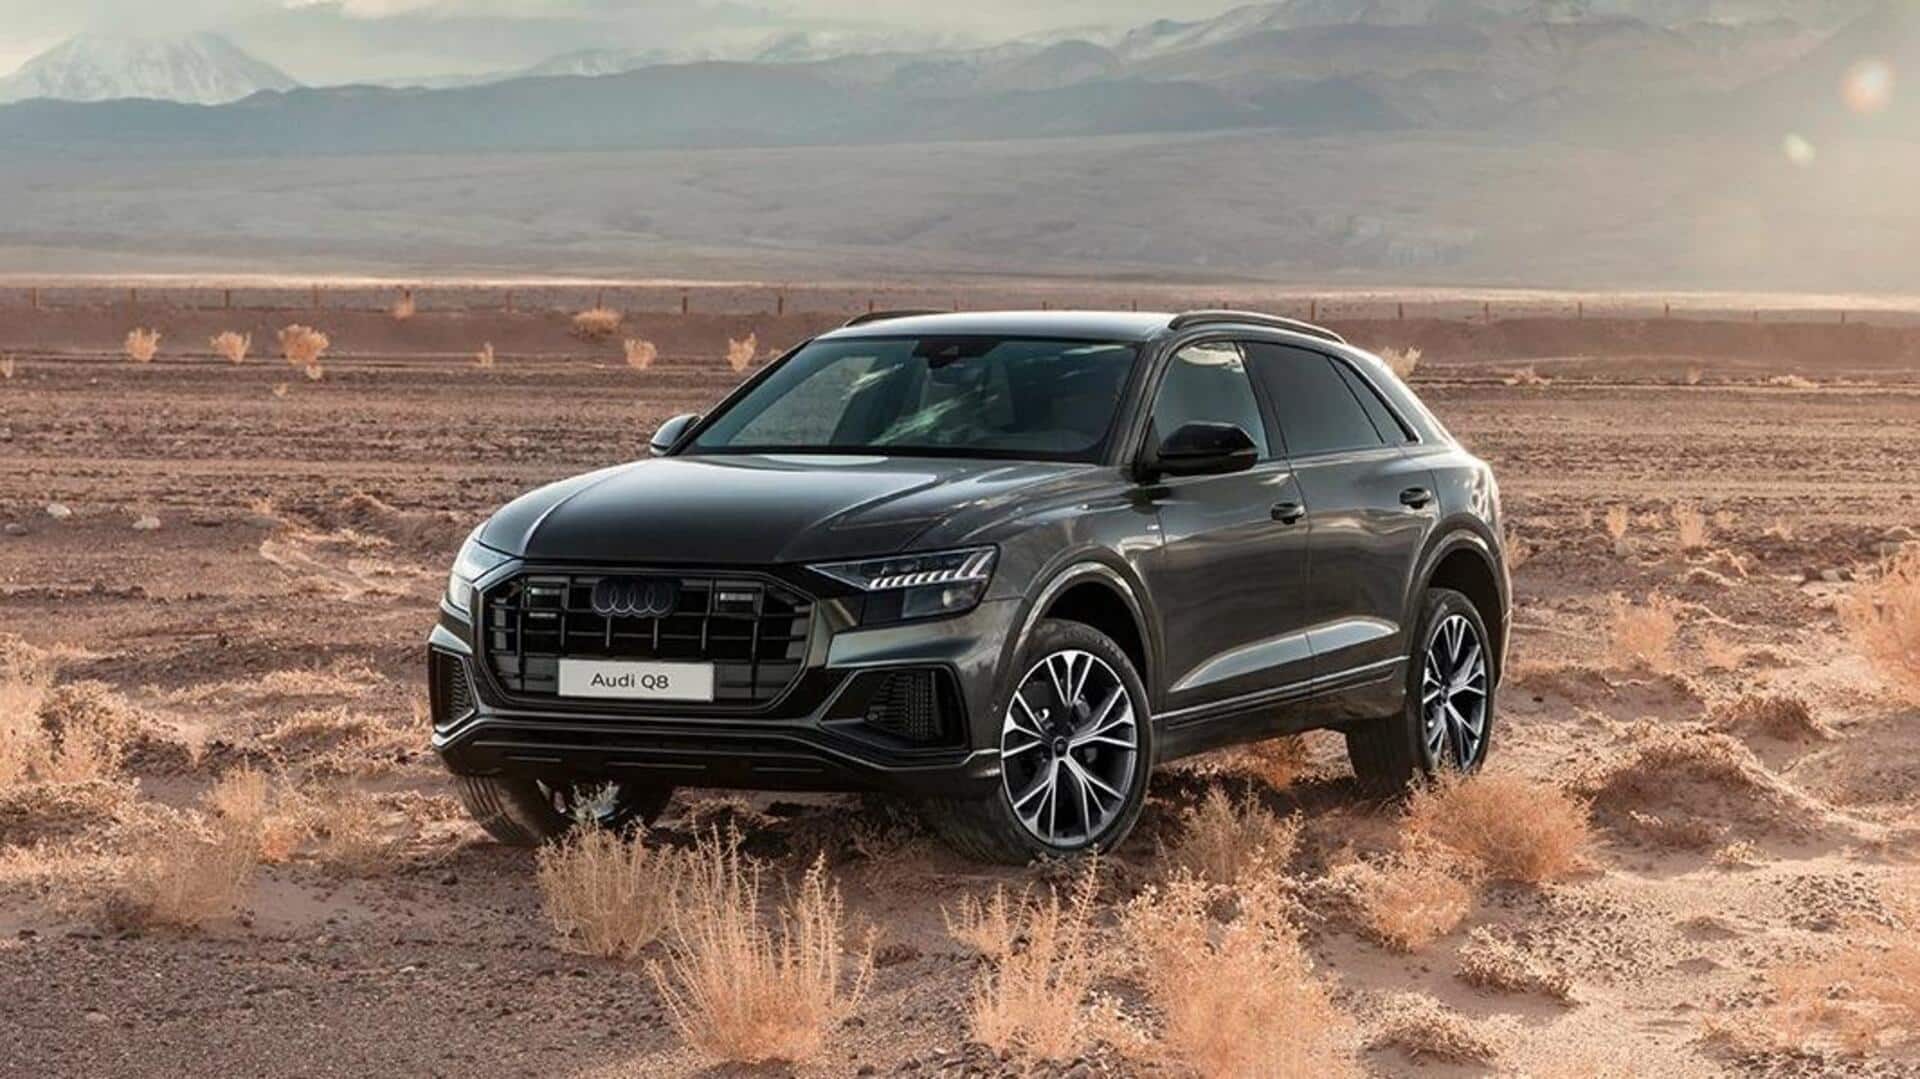 Audi Q8 Limited Edition debuts at Rs. 1.2 crore